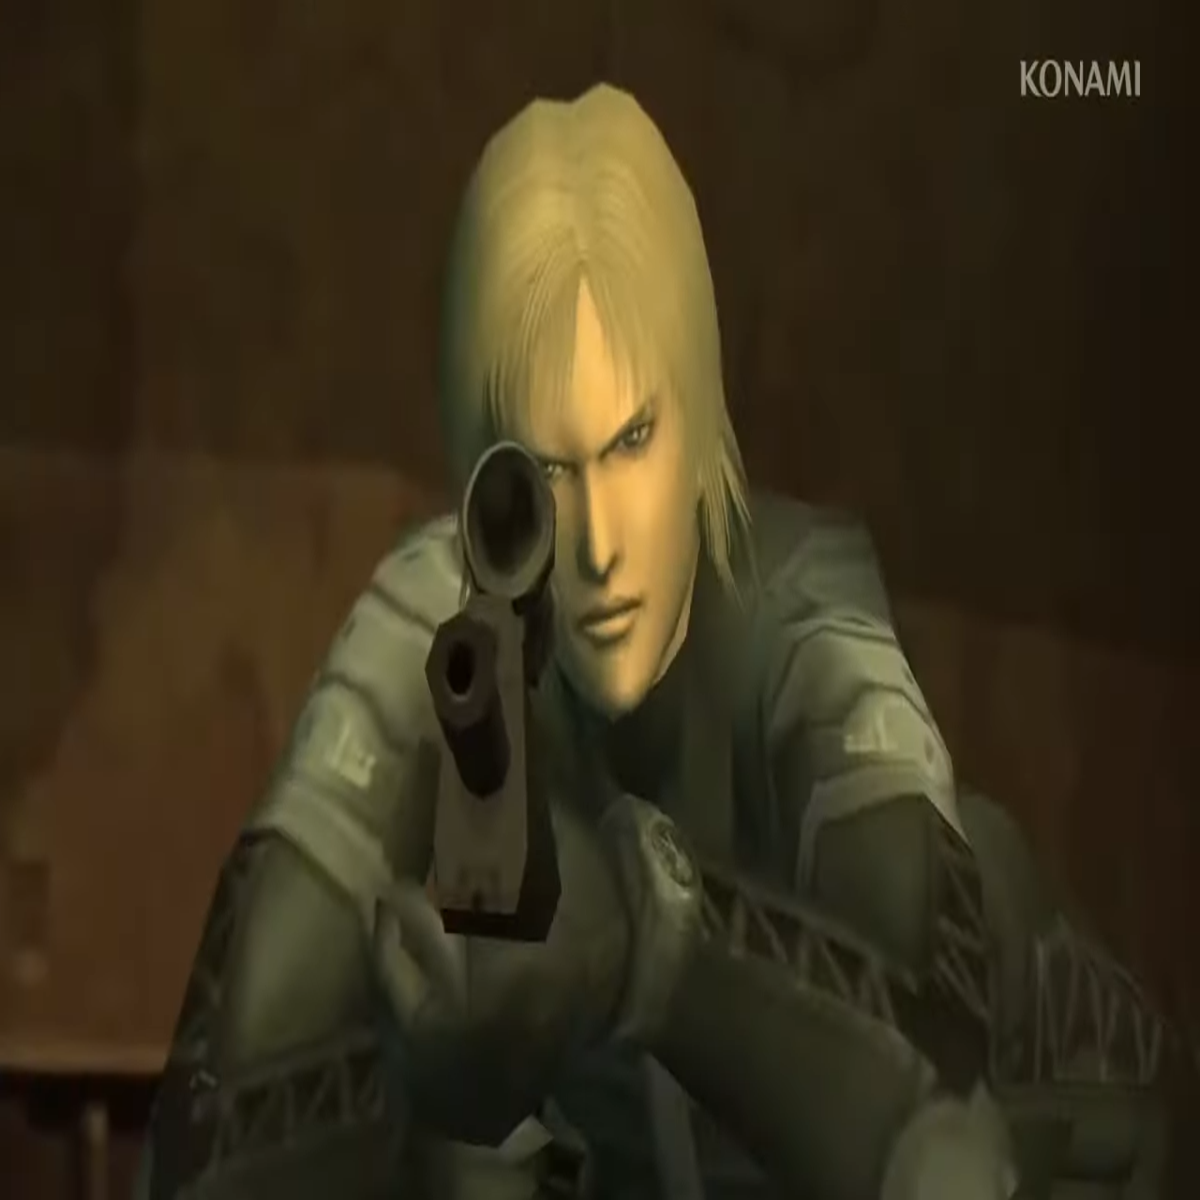 Metal Gear Master Collection Includes 5 Games You Should Play